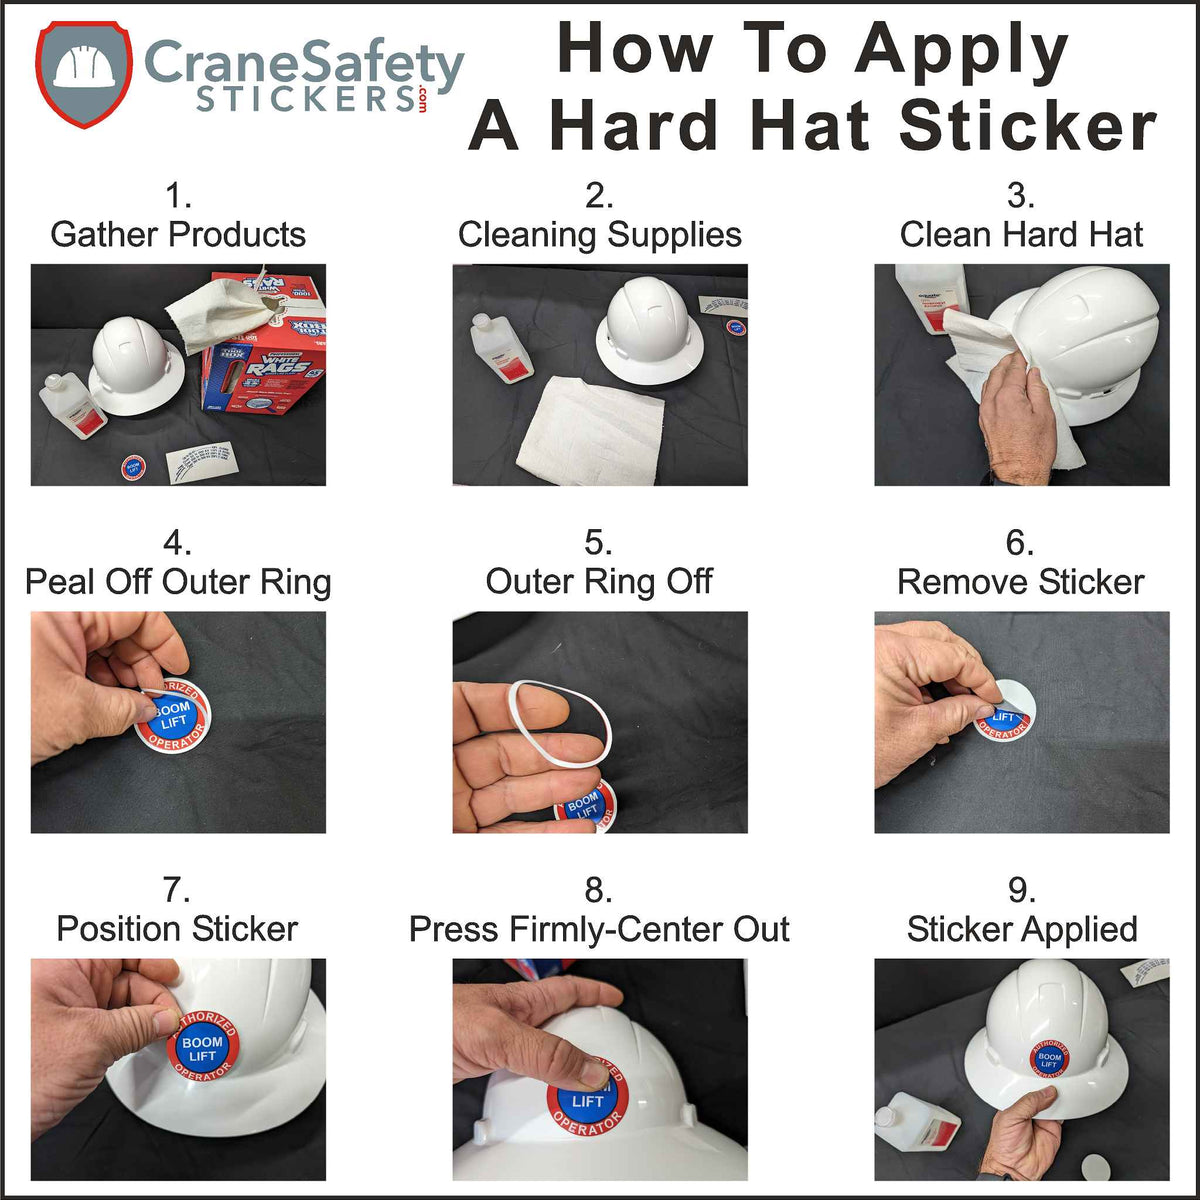 How to Apply a First Aid Certified Sticker to a Hard Hat